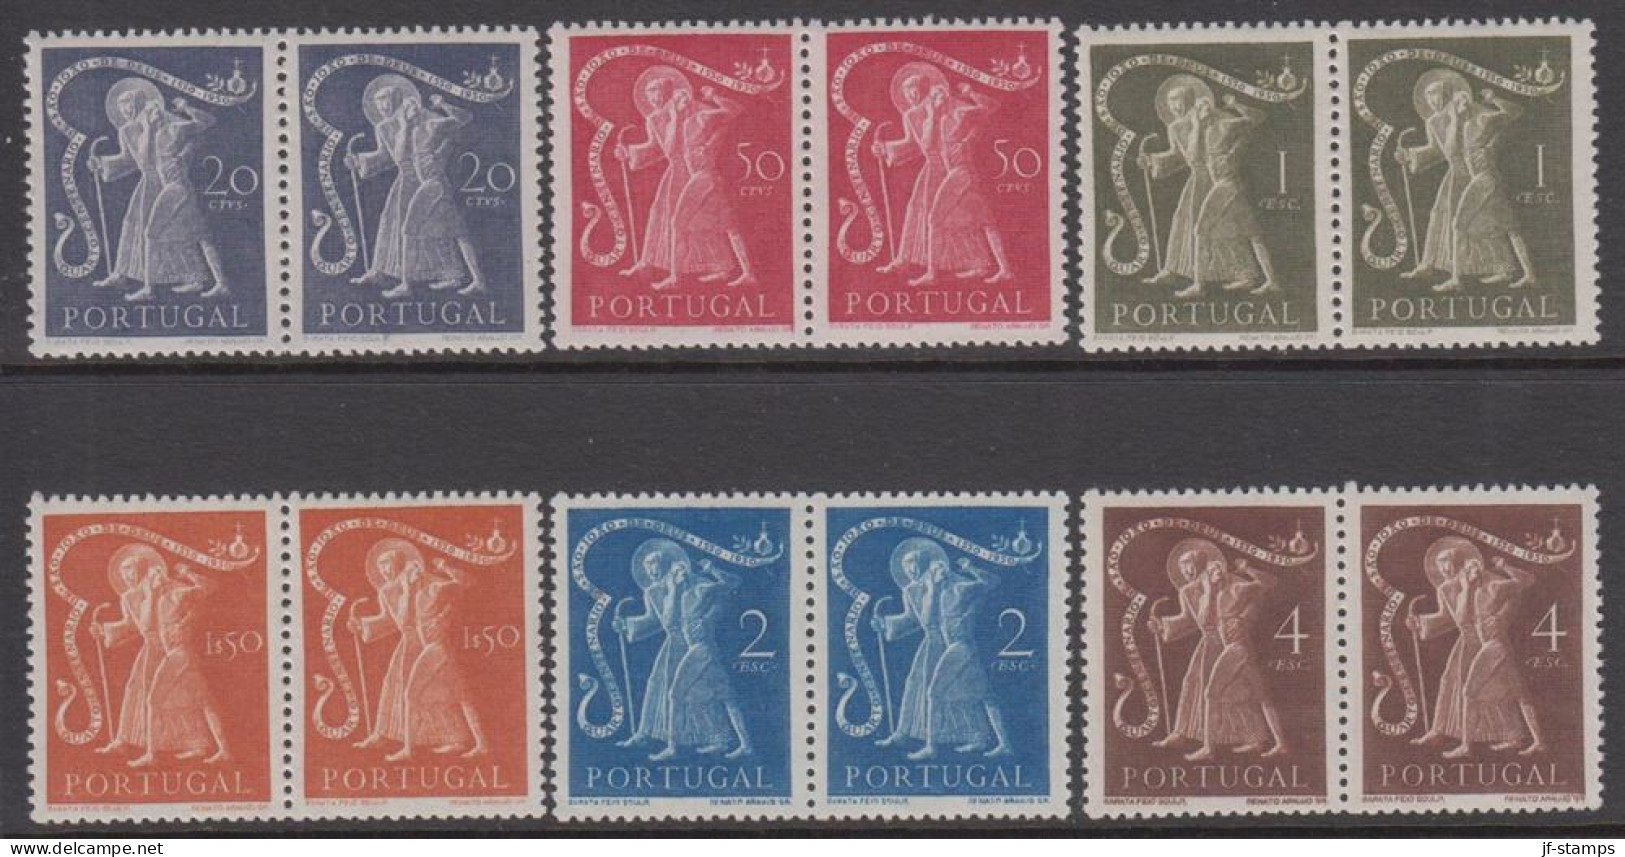 1950. PORTUGAL. JOAO DE DEUS. Complete Set With 6 Stamps In Pairs. Never Hinged. Beautifu... (Michel 752-757) - JF539234 - Neufs